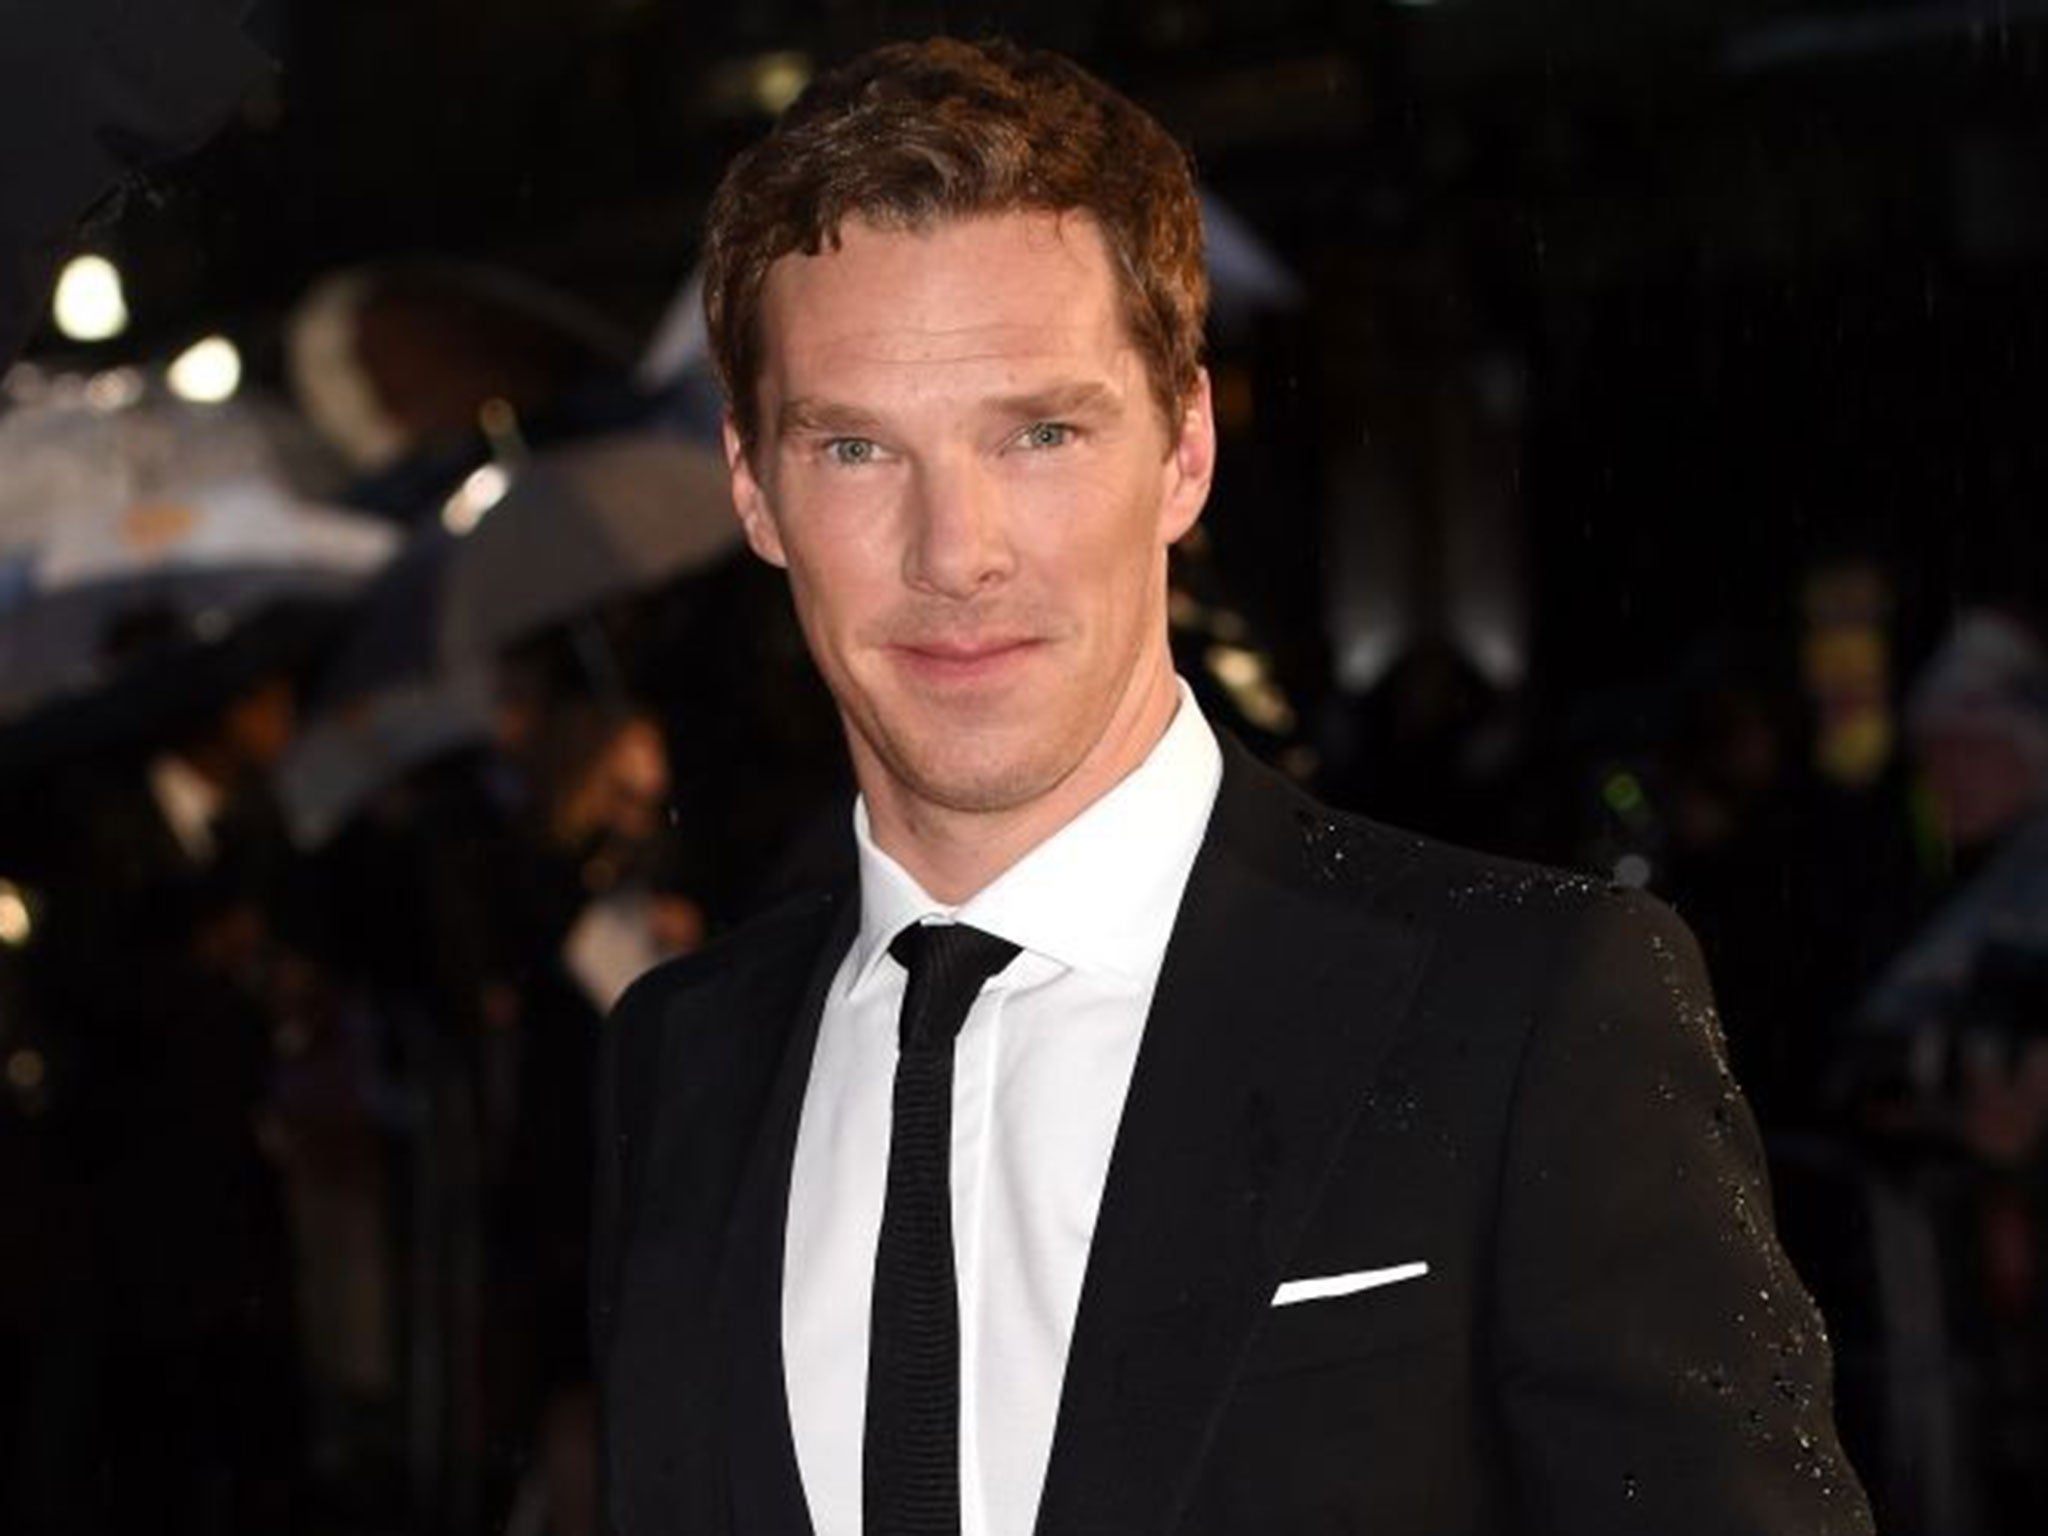 Actor Benedict Cumberbatch is one of our straight allies